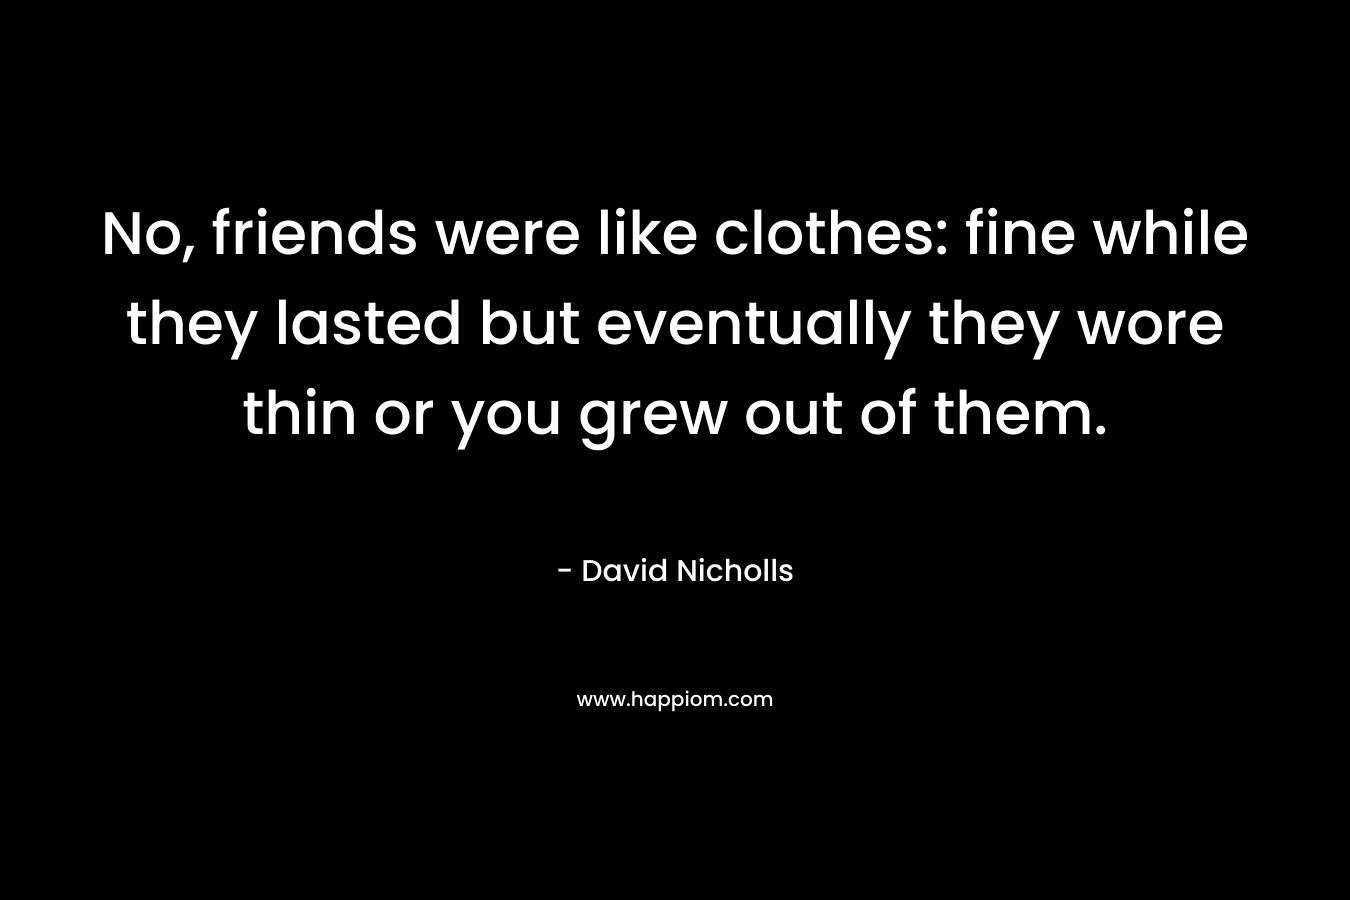 No, friends were like clothes: fine while they lasted but eventually they wore thin or you grew out of them. – David Nicholls